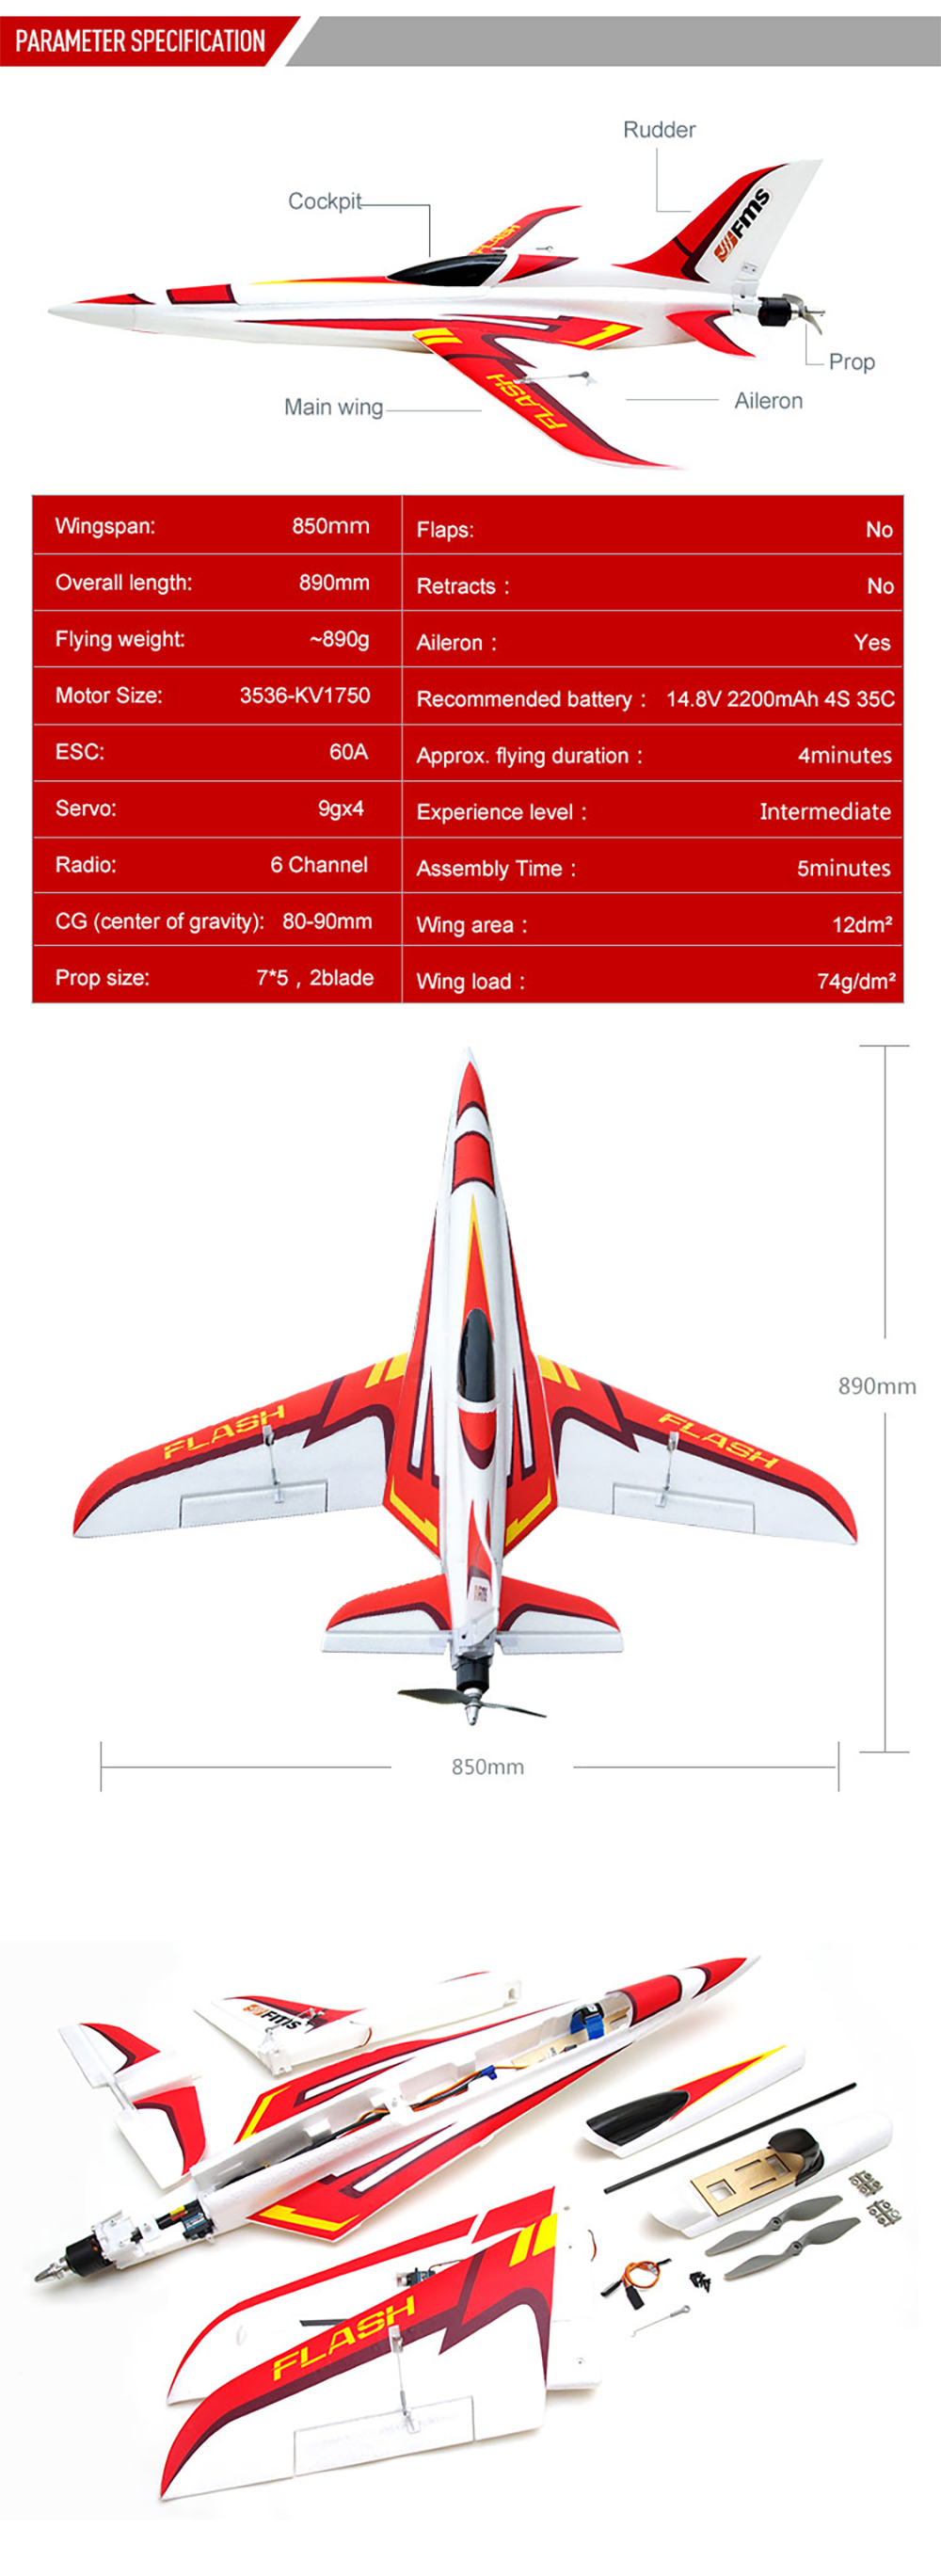 FMS-850mm-Wingspan-Flash-High-Speed-180kmh-4S-Racer-EPO-RC-Airplane-PNP-with-Reflex-Stabilizer-Fligh-1774714-4